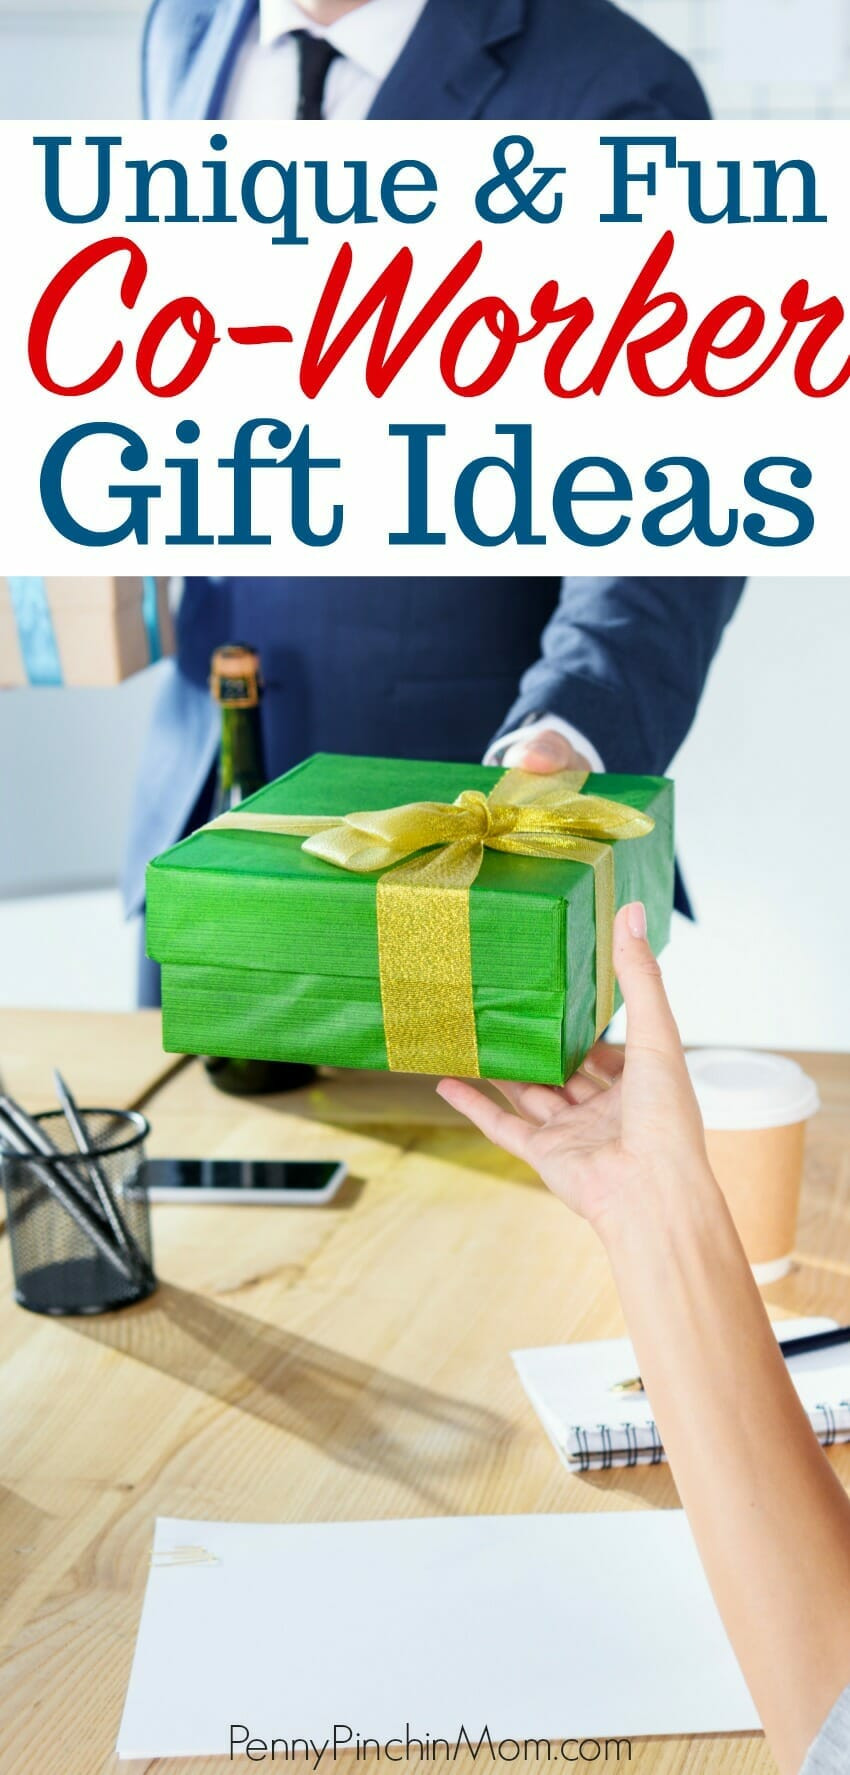 Small Holiday Gift Ideas For Employees
 Co Worker Gift Ideas for Anyone on Your List This Year